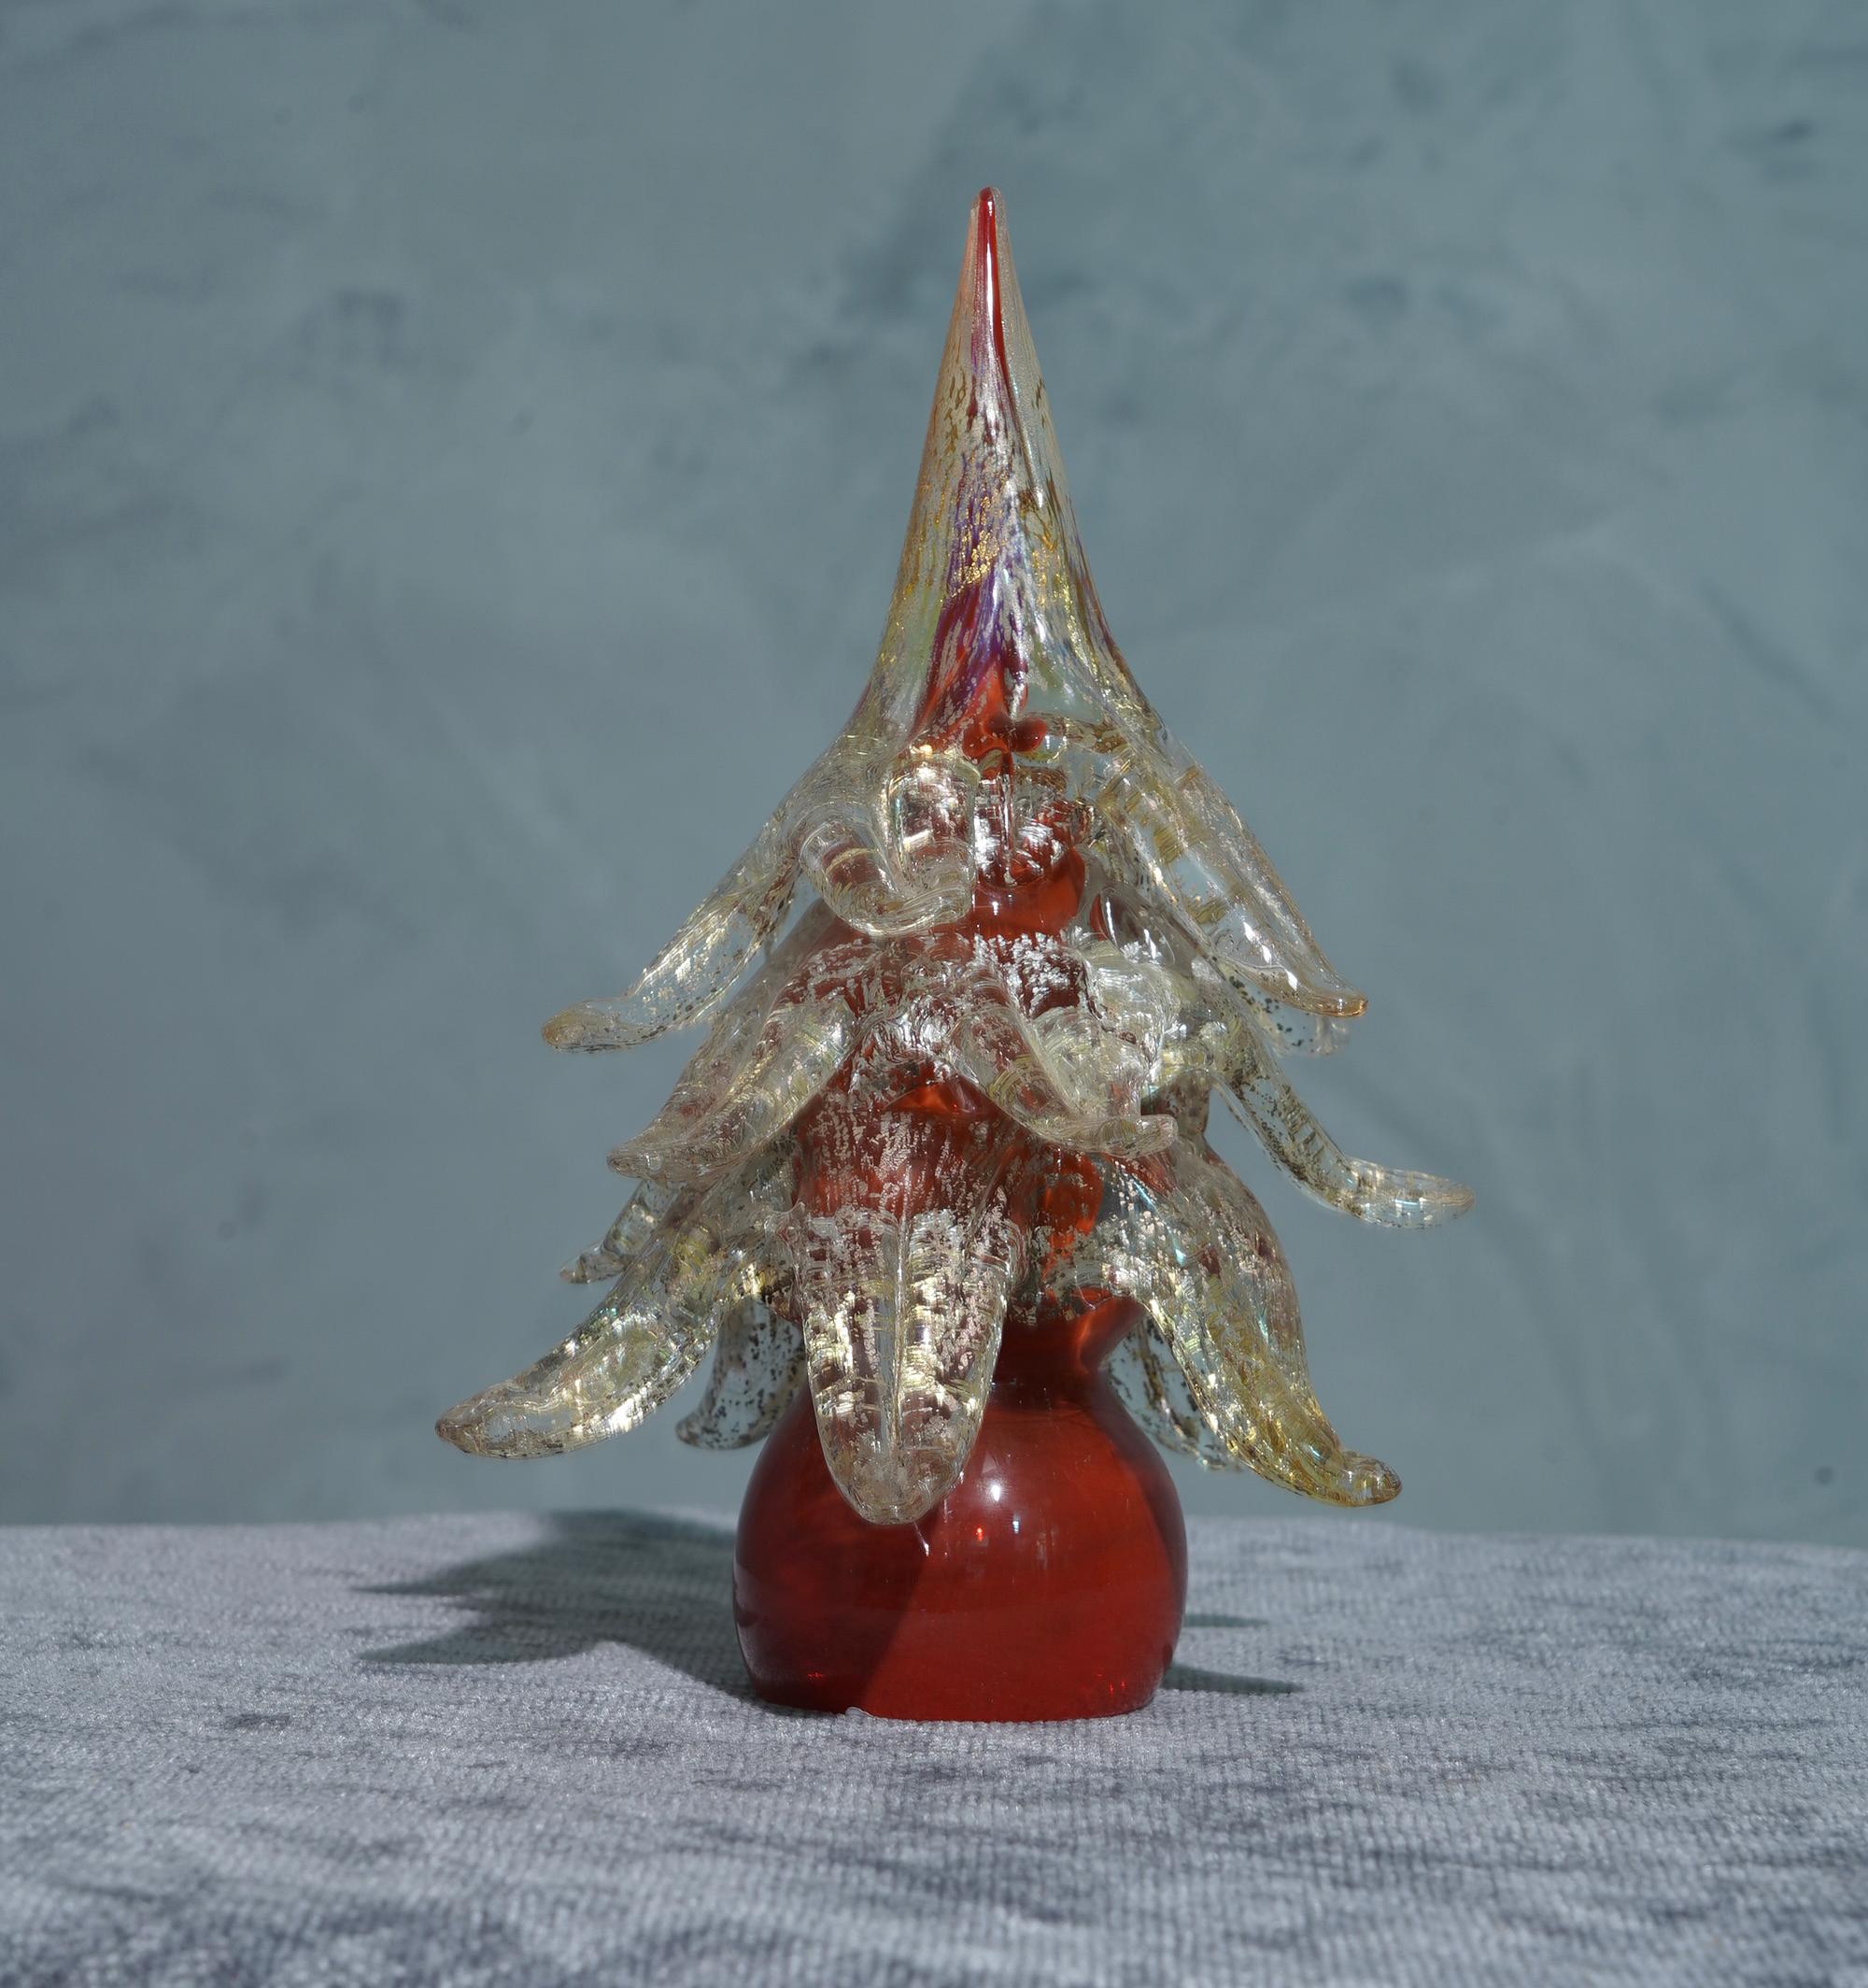 Very particular sculpture of Tree in Murano glass, stylized and linear like the art of glass in Venice commands.

The sculpture represents a stylized Christmas tree, with a red stem and large transparent leaves with specks of gold and white. You can